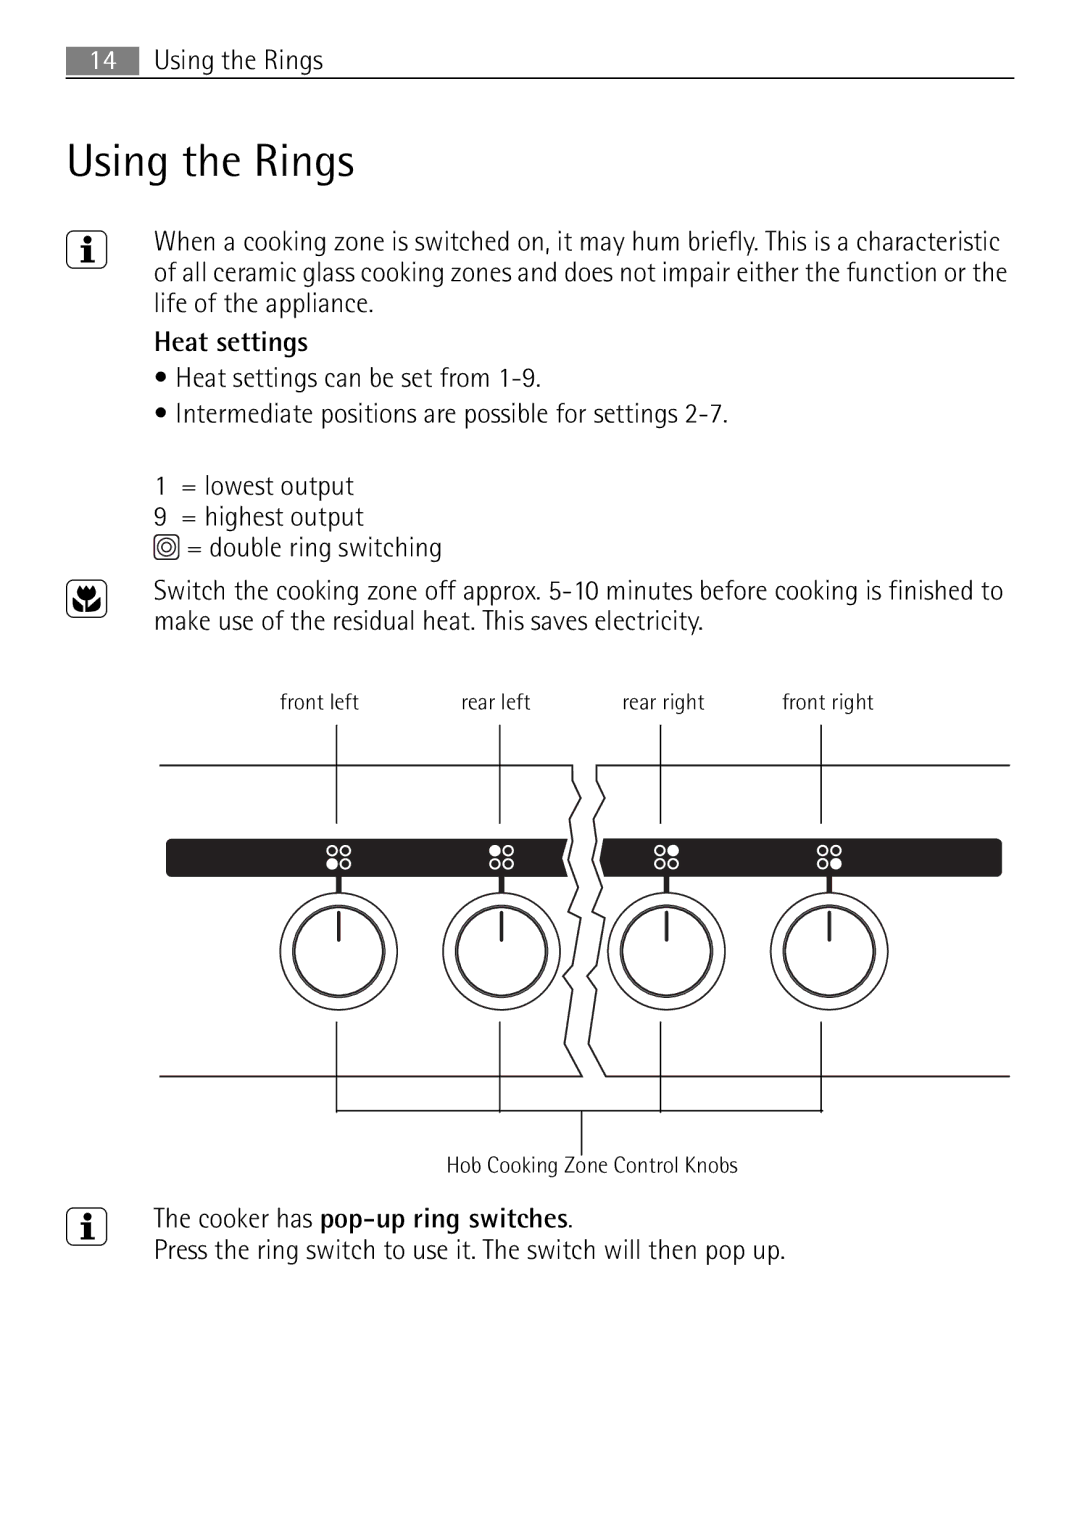 Electrolux 41056VH user manual Using the Rings, Switch the cooking zone off approx 